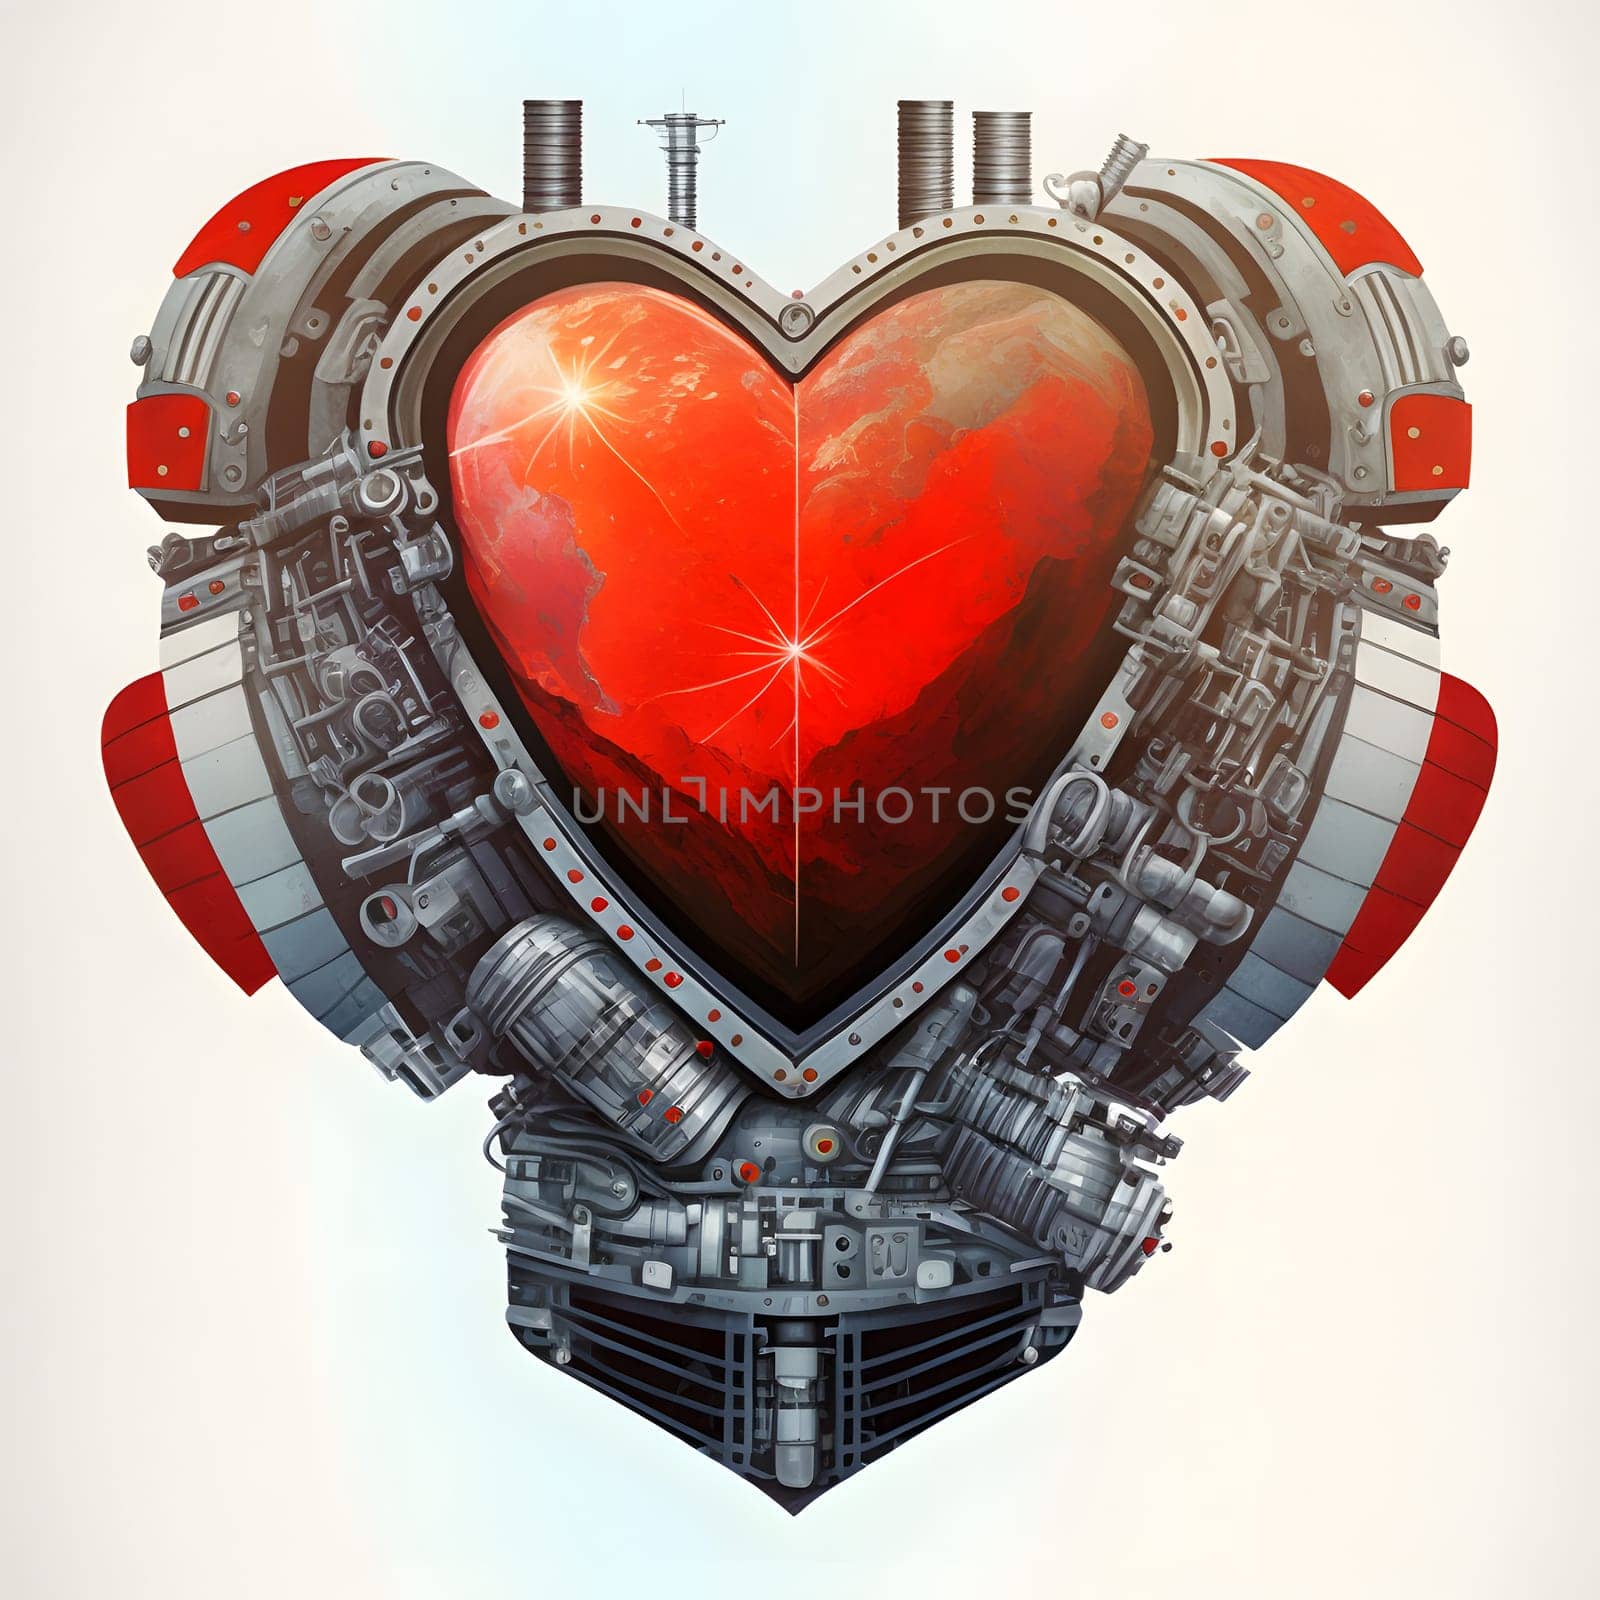 nasa space exploration style heart for cosmic valentines day celebration, neural network generated art. Digitally generated image. Not based on any actual scene or pattern.